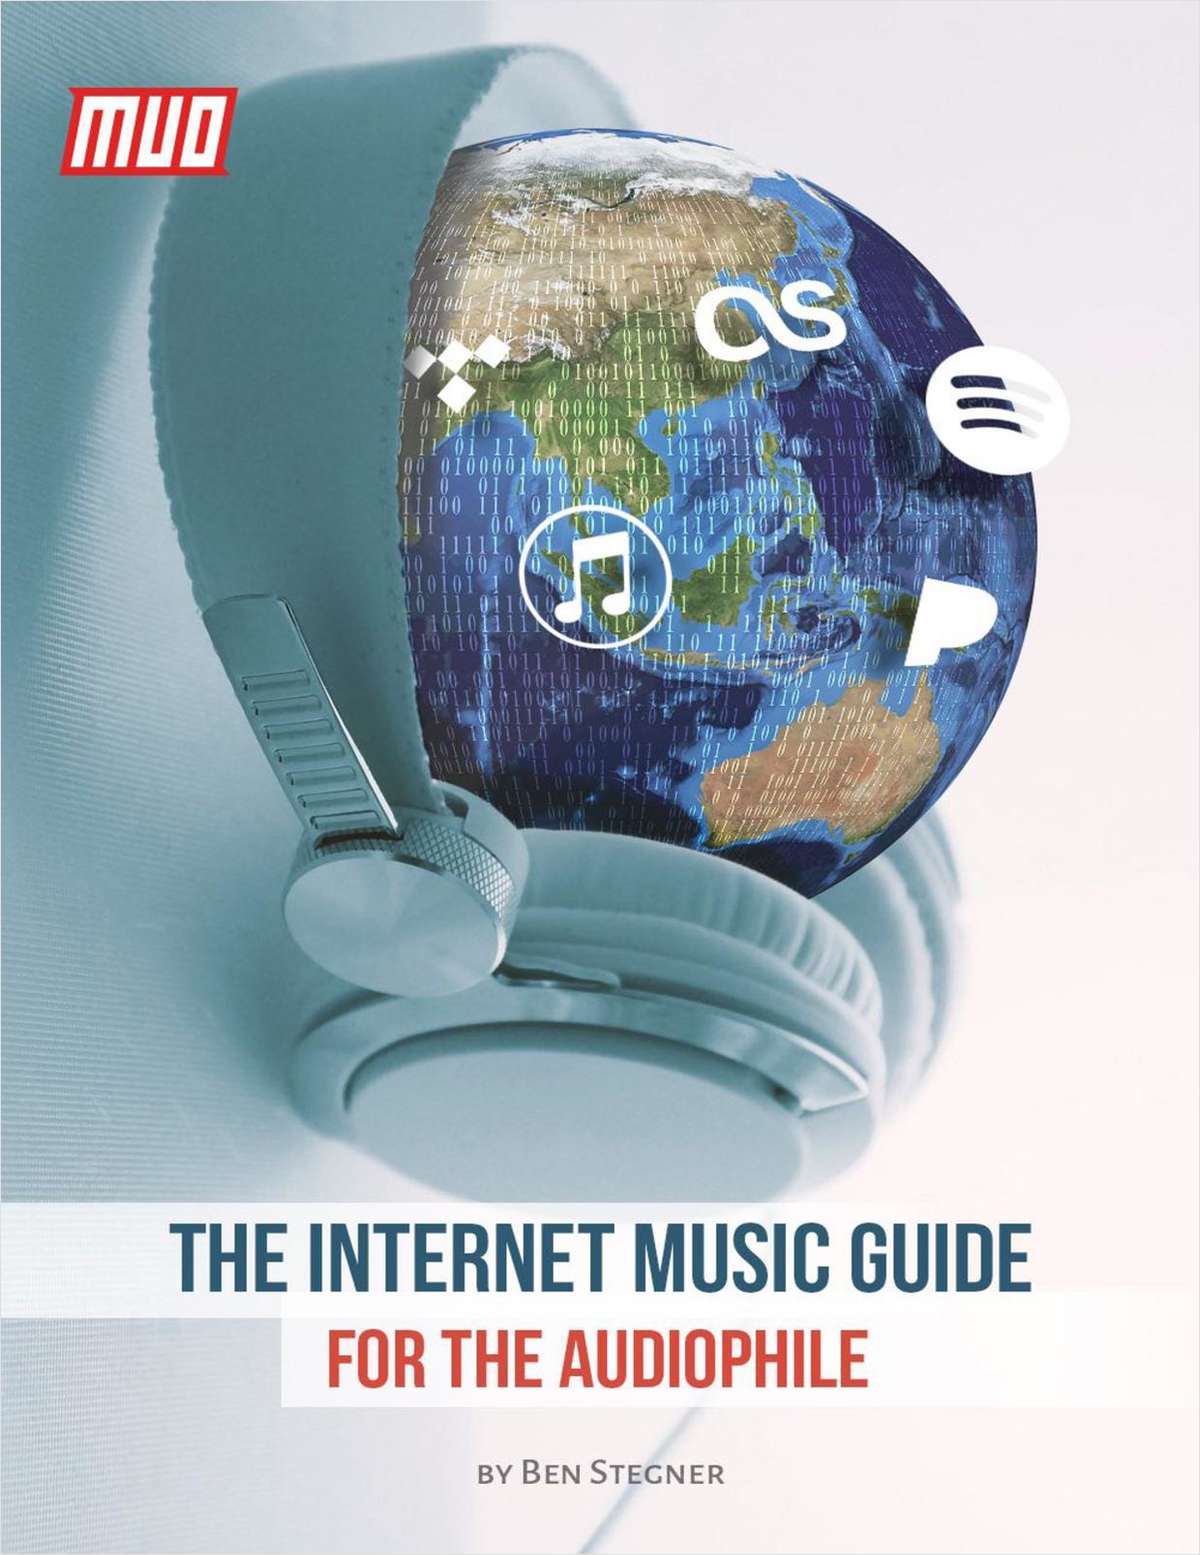 The Internet Music Guide for the Audiophile